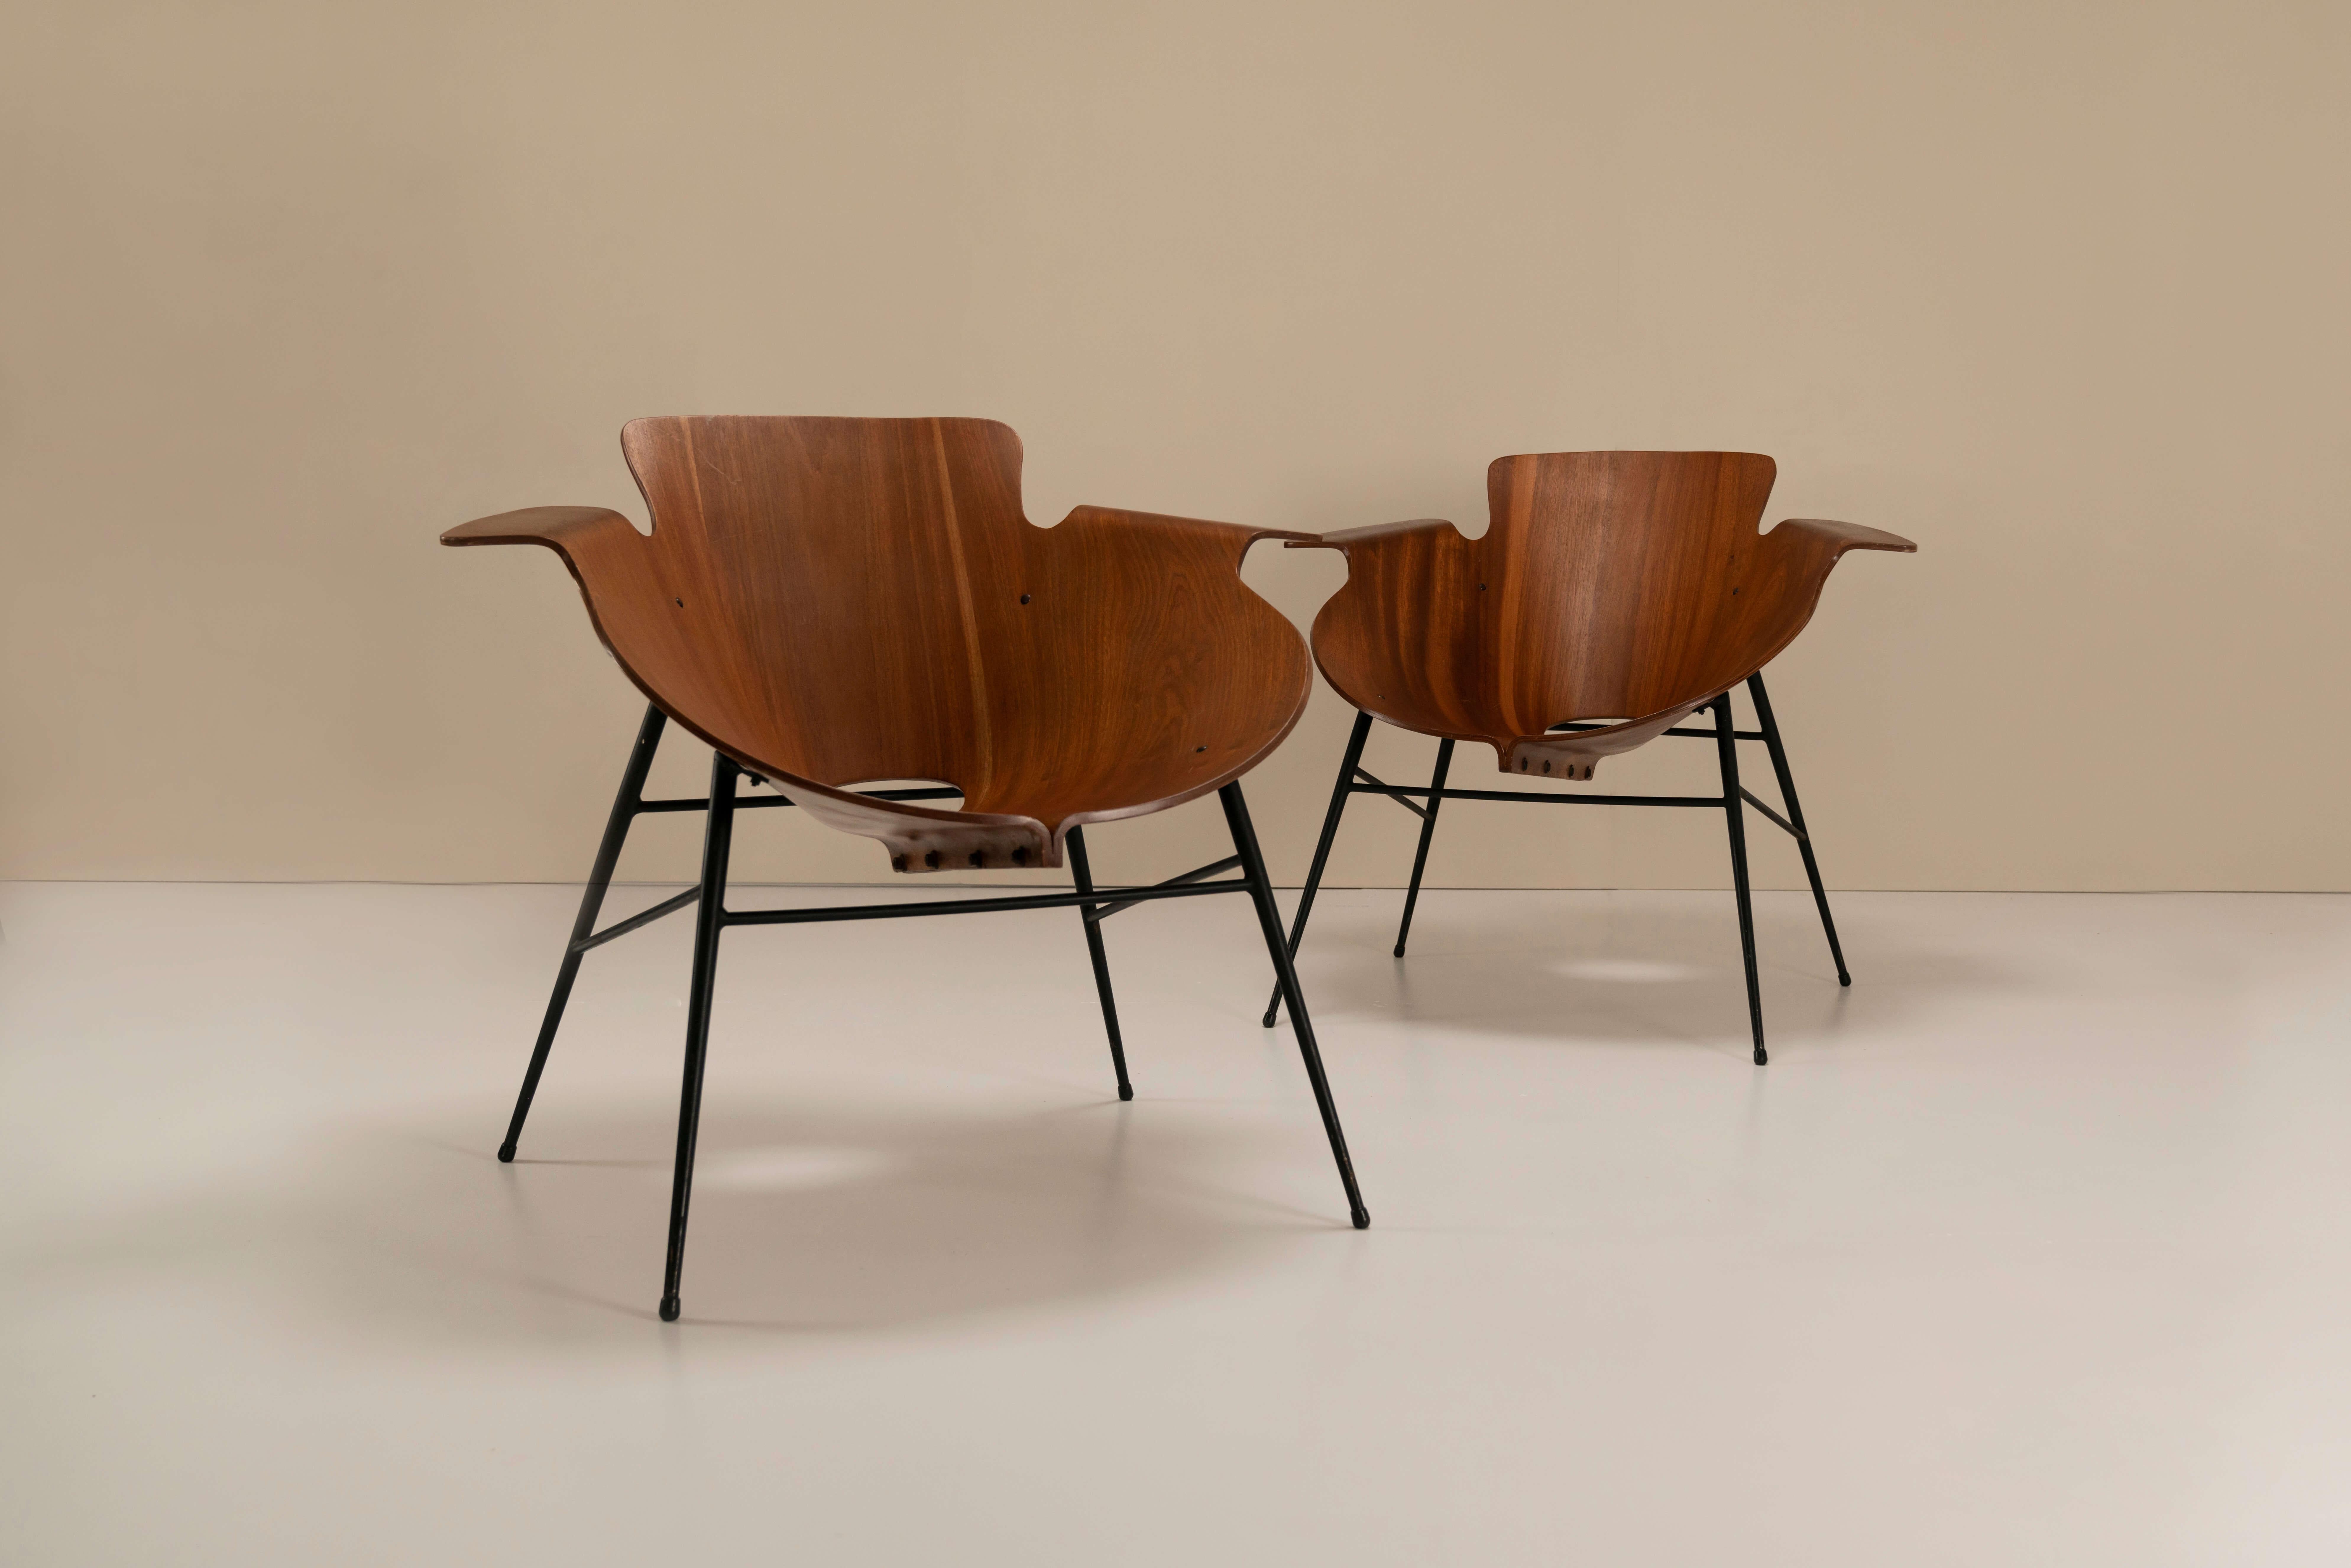 These beautiful bentwood chairs were designed in 1958 by the Italian architect Eugenio Gerli for Società Compensatie Curvi. This company, which was located in Monza at the time, specialized in manufacturing highly stylized chairs made of bentwood